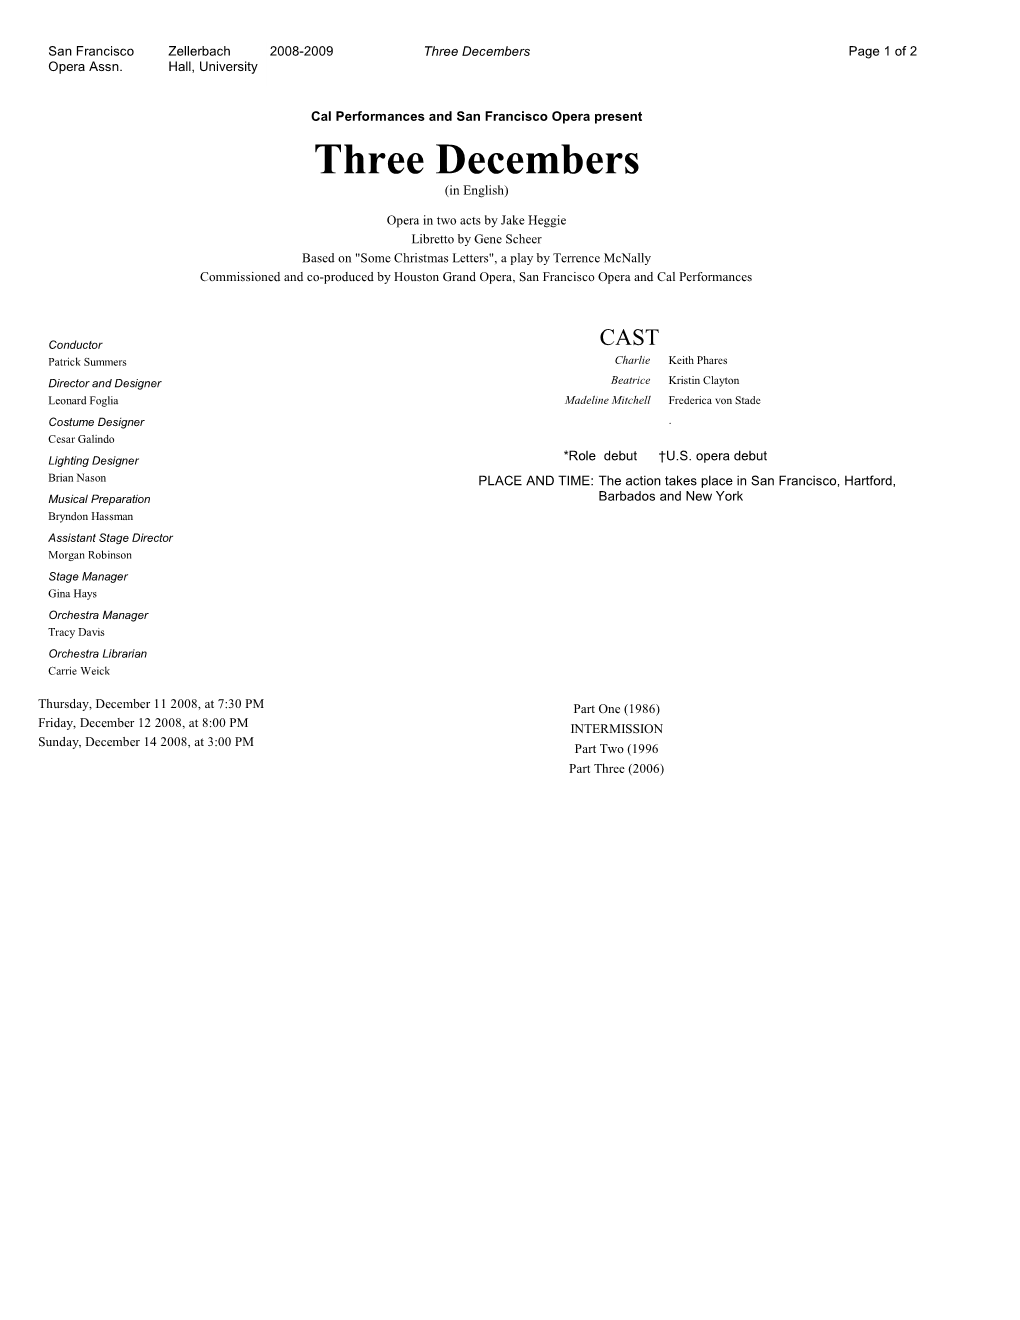 Three Decembers Page 1 of 2 Opera Assn